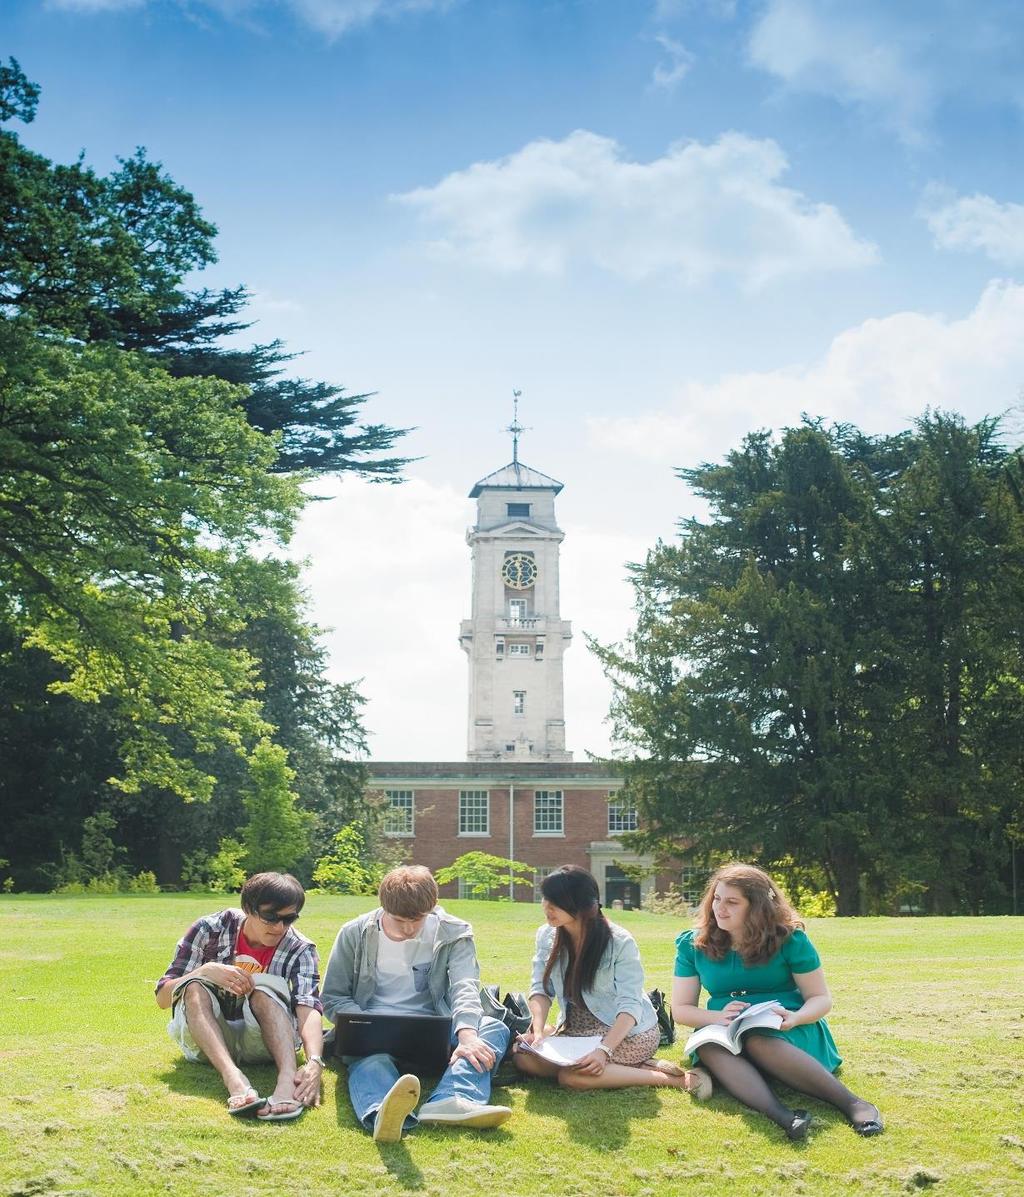 Nottingham Summer Schools FREE programmes which offer Year 12 students the opportunity to: Explore